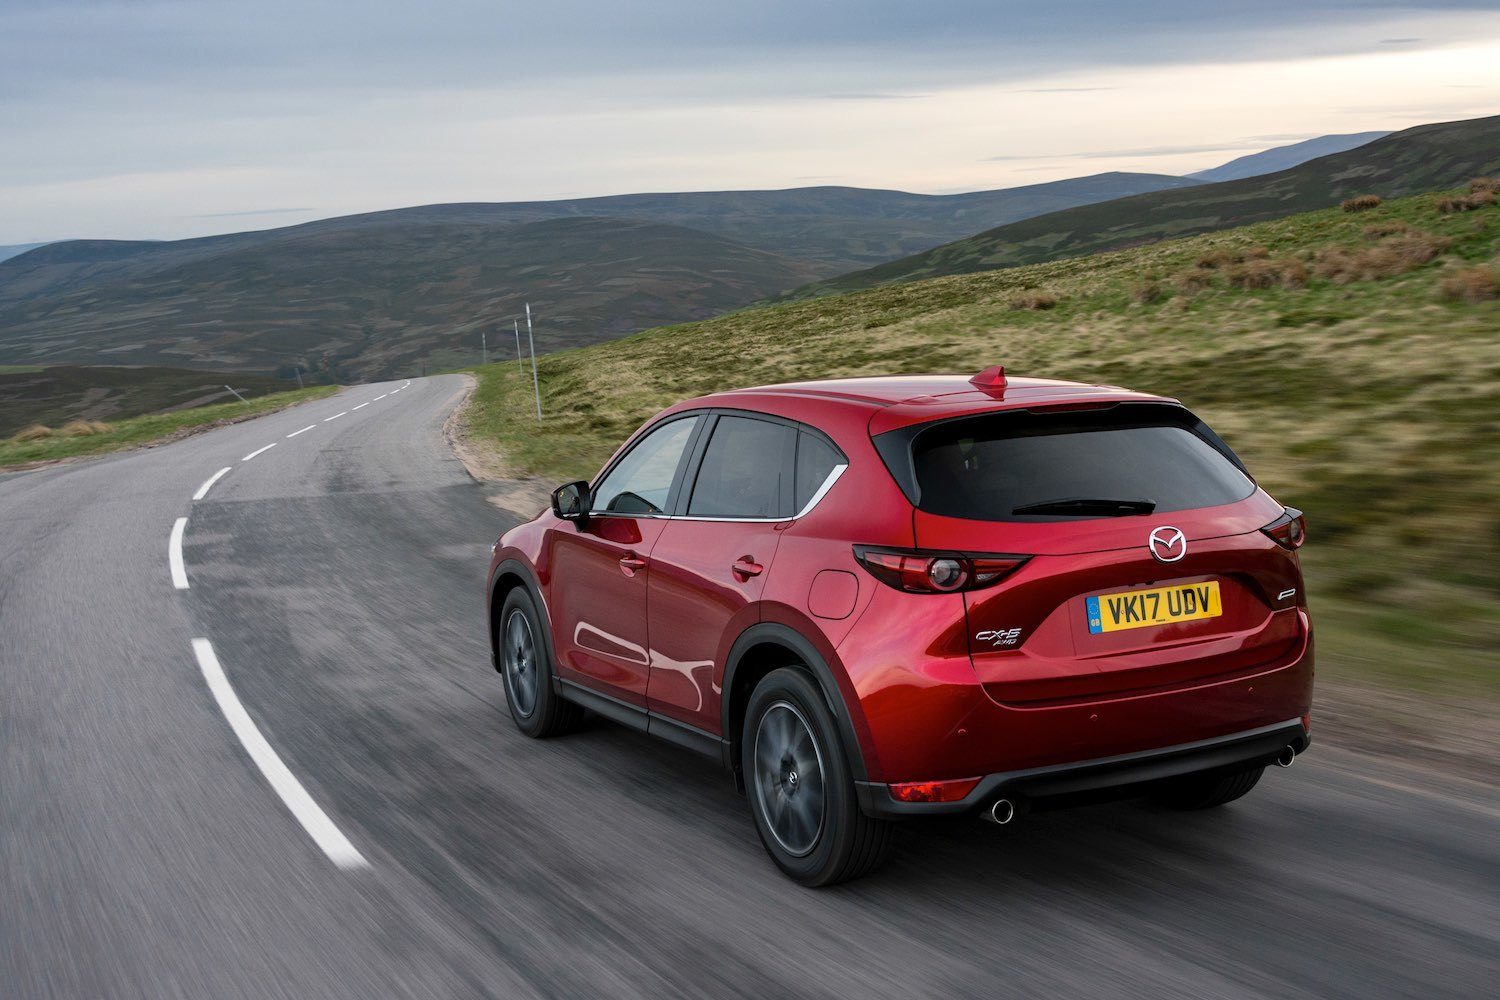 Tom Scanlan reviews the all new Mazda CX-5 in the Cairngorms Scotland for drive 25